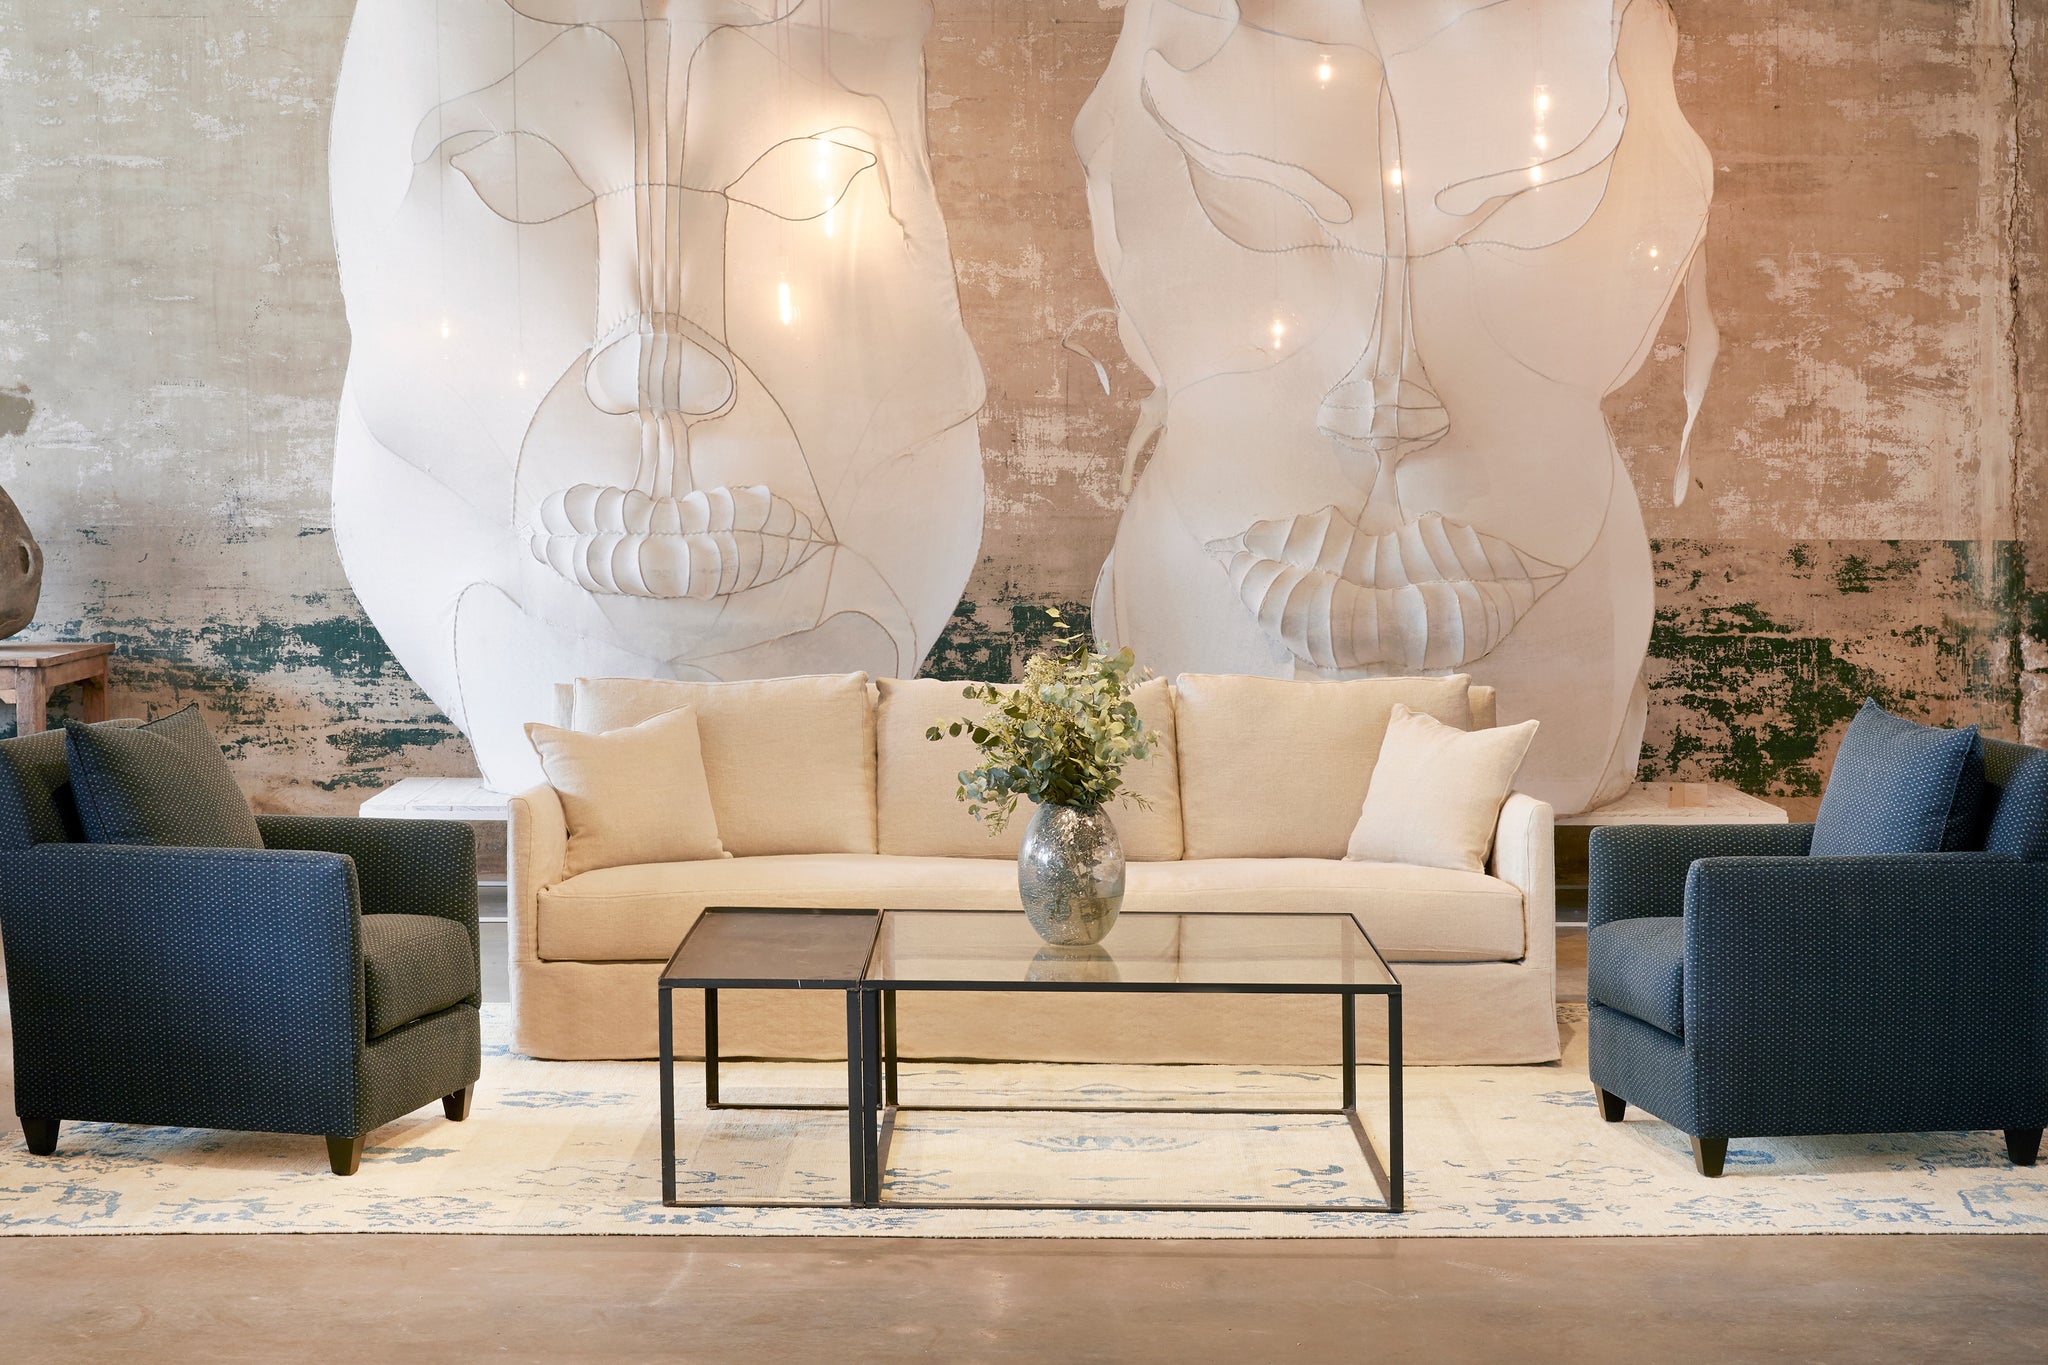  The 96" slipcovered sofa is  in Brevard Burlap, in a large room with 2 white face mask sculptures on the wall. There are 2 upholstered chairs on the side, in dark blue fabric with small dots and a metal and glass coffee table in front. Photographed in Brevard Burlap. 